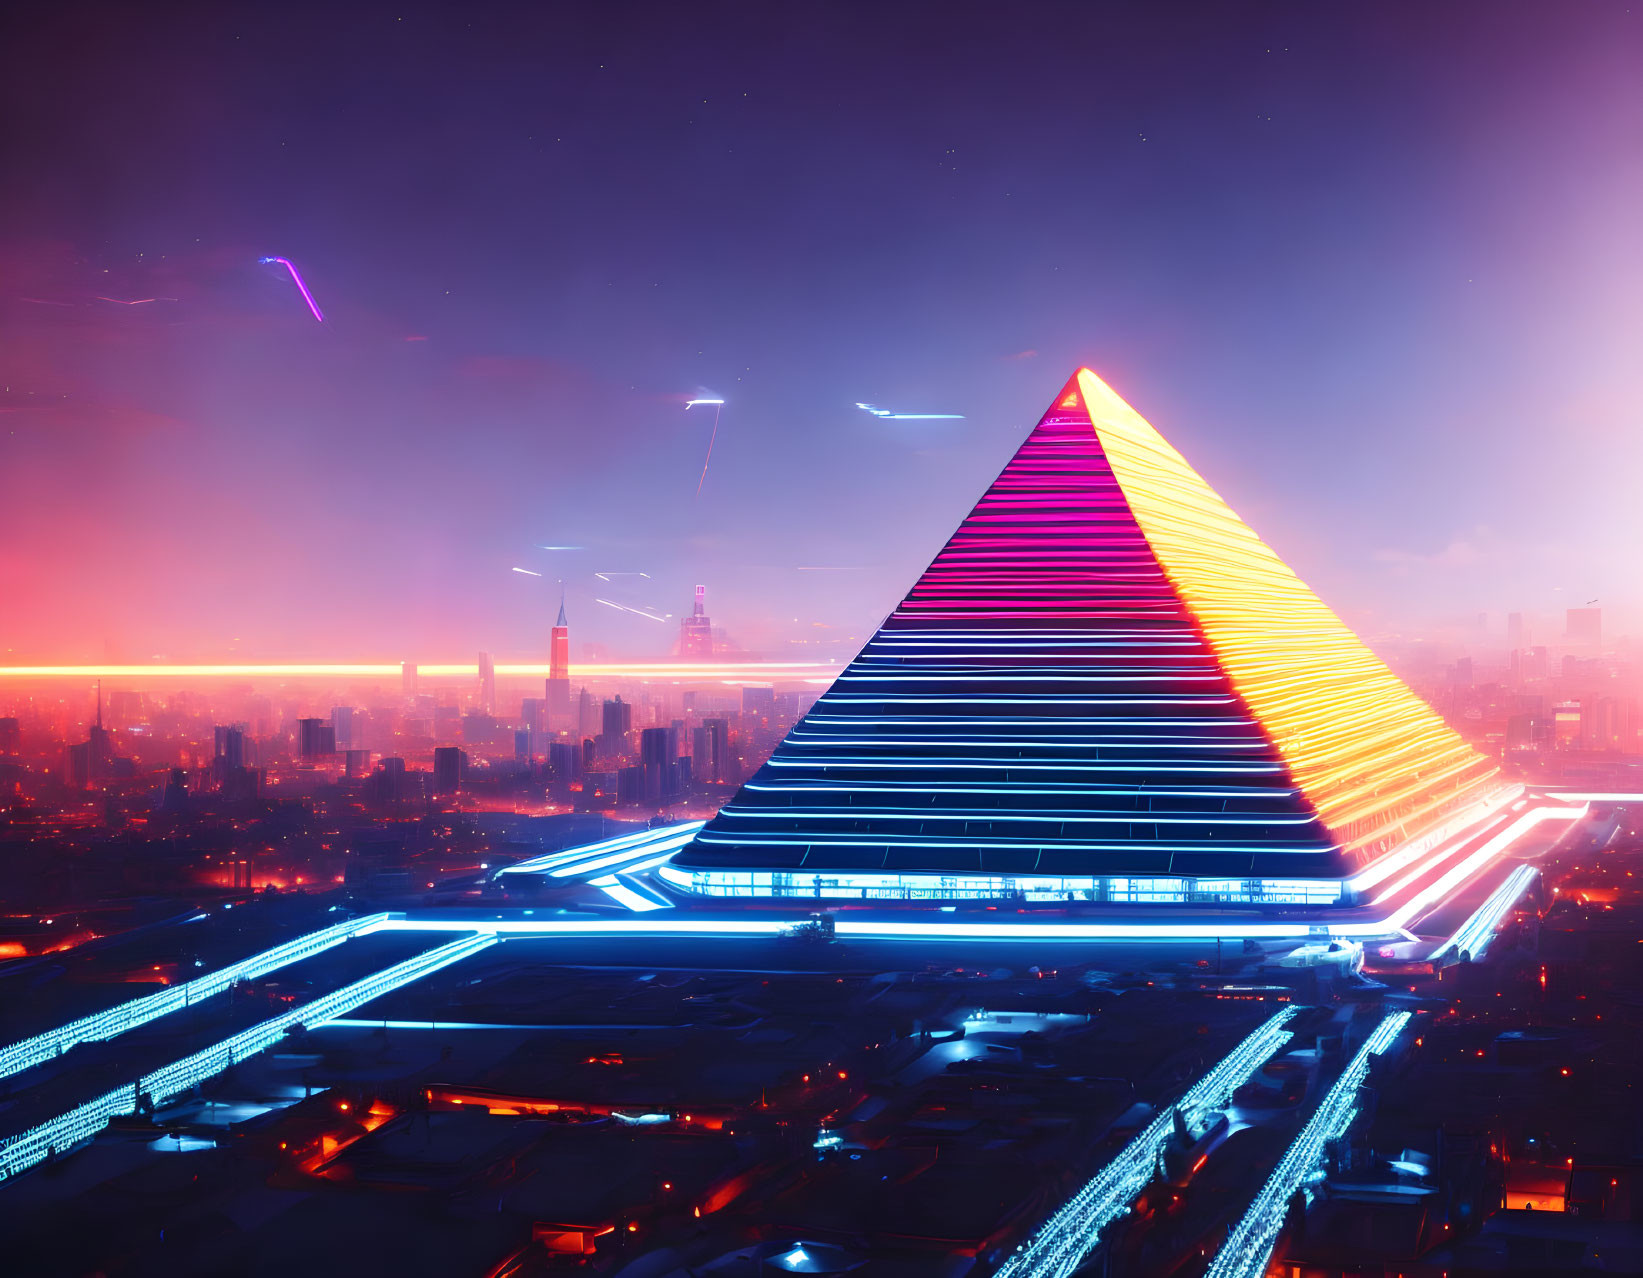 Futuristic neon-lit pyramid in cityscape with flying vehicles